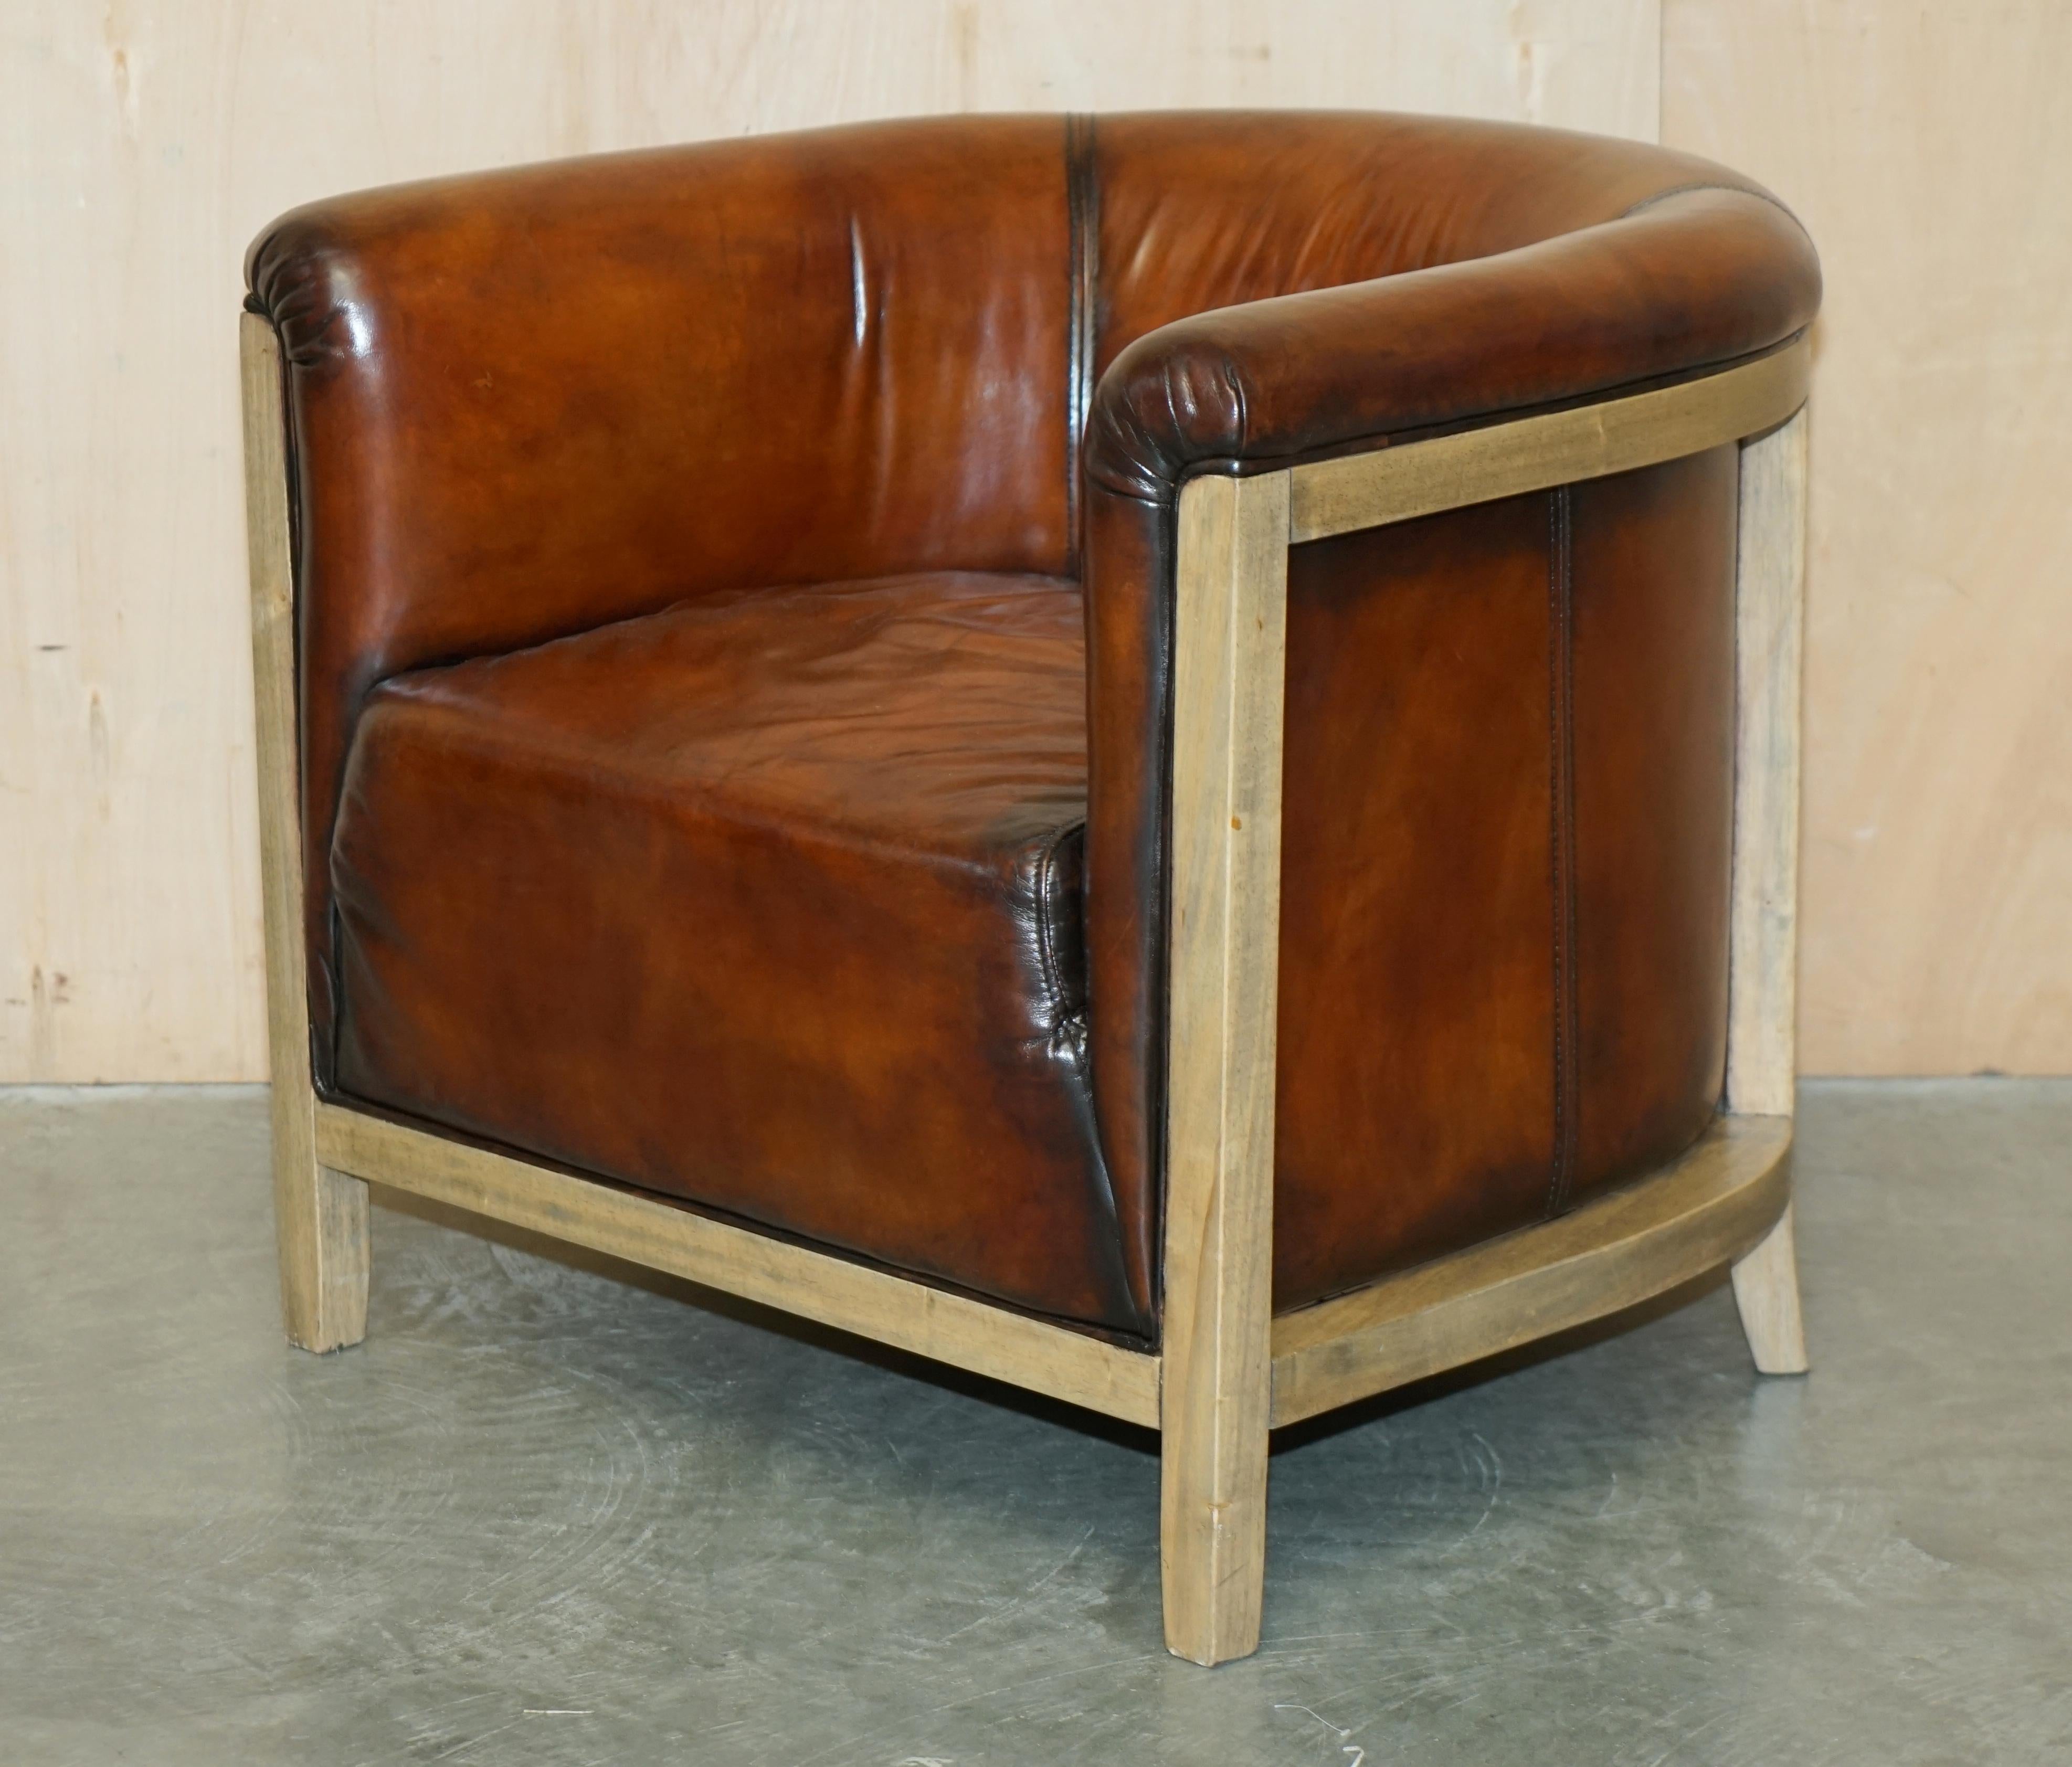 Royal House Antiques

Royal House Antiques is delighted to offer for sale this lovely pair of fully restored, hand dyed Whisky brown leather English tub or club armchairs with Limed Oak frames

Please note the delivery fee listed is just a guide, it